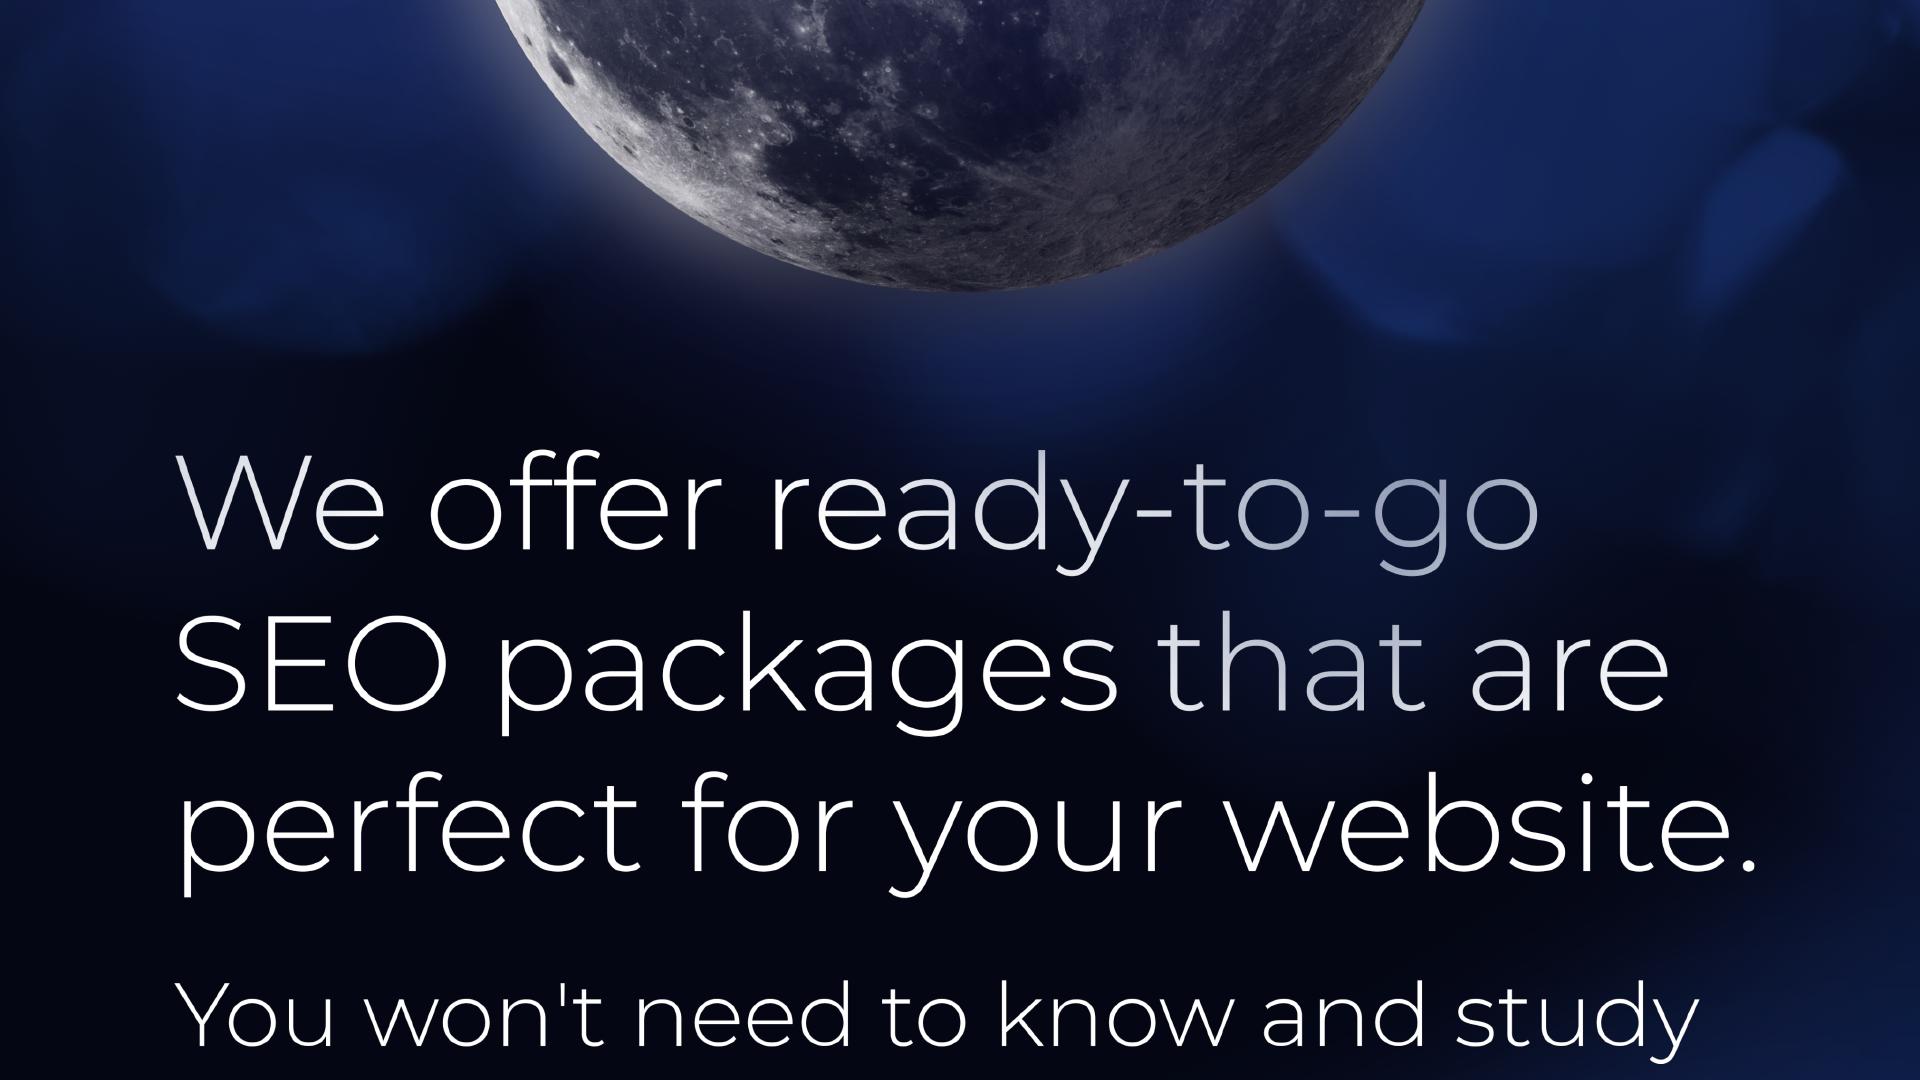 We offer ready-to-go SEO packages that are perfect for your website. You won't need to know and study